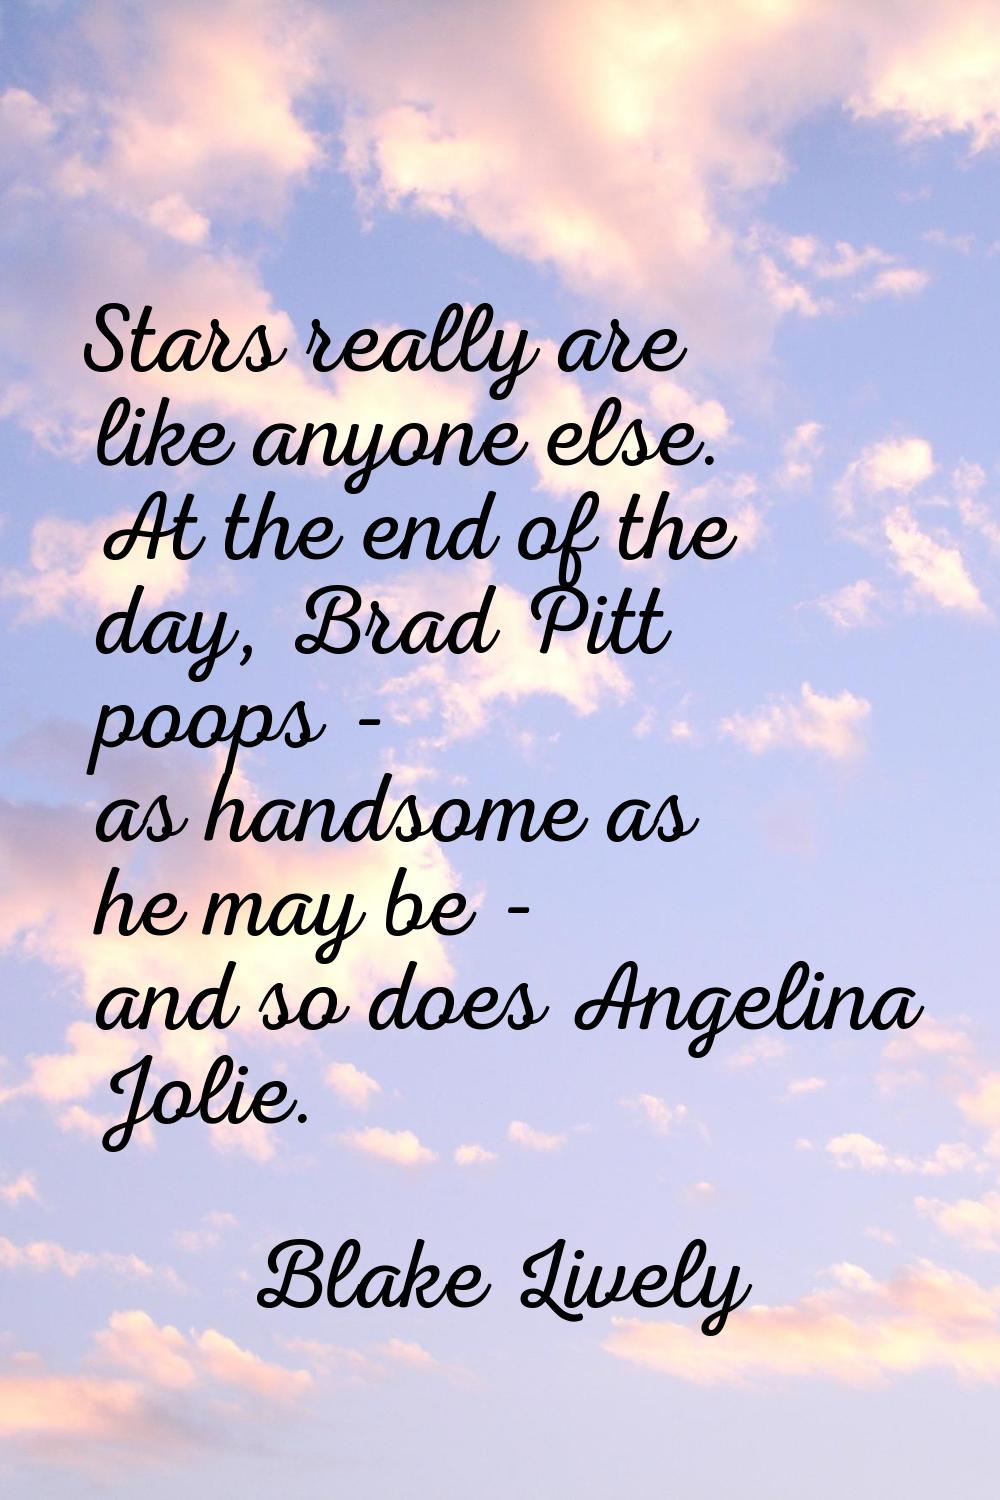 Stars really are like anyone else. At the end of the day, Brad Pitt poops - as handsome as he may b